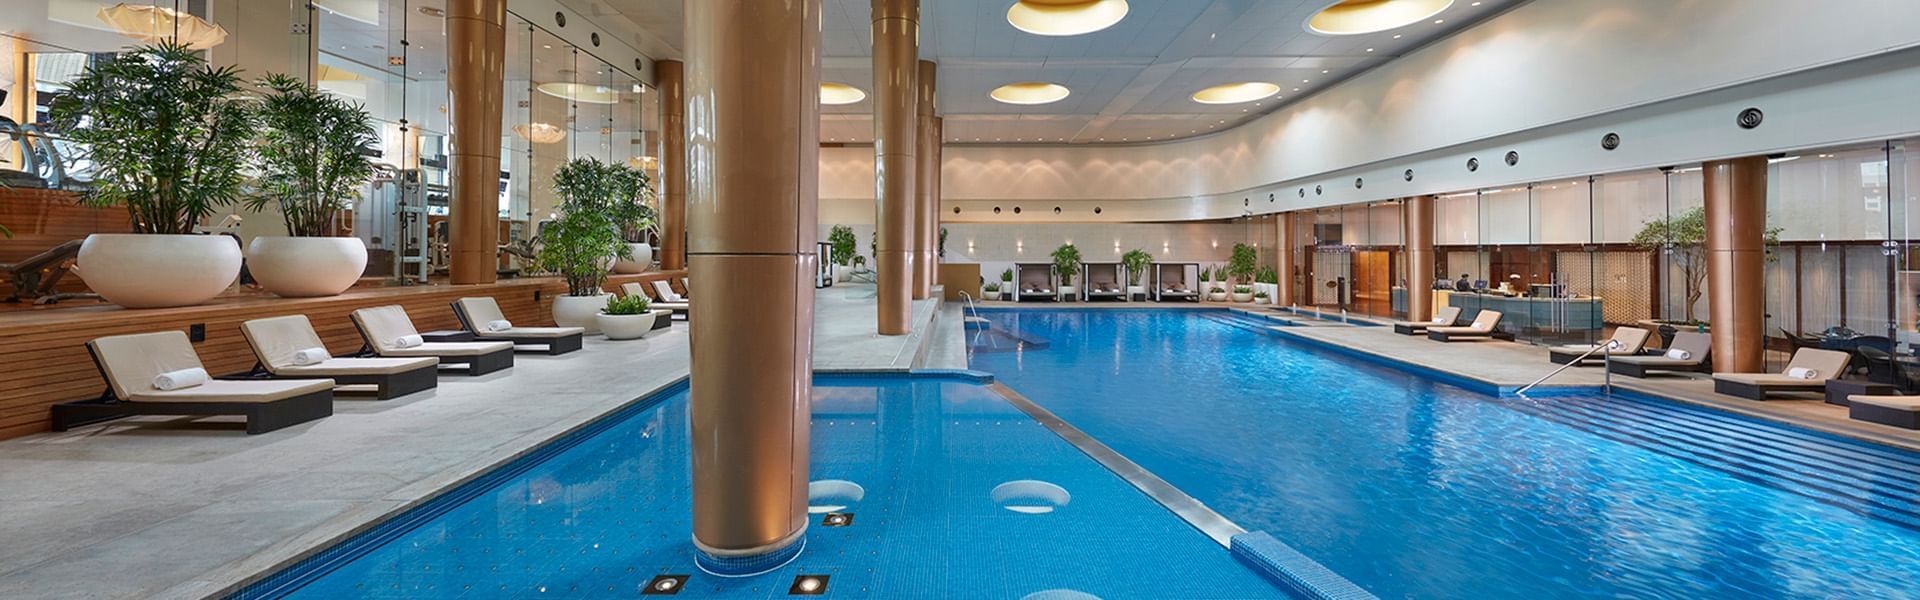 Sunbeds by the indoor pool at Crown Hotels